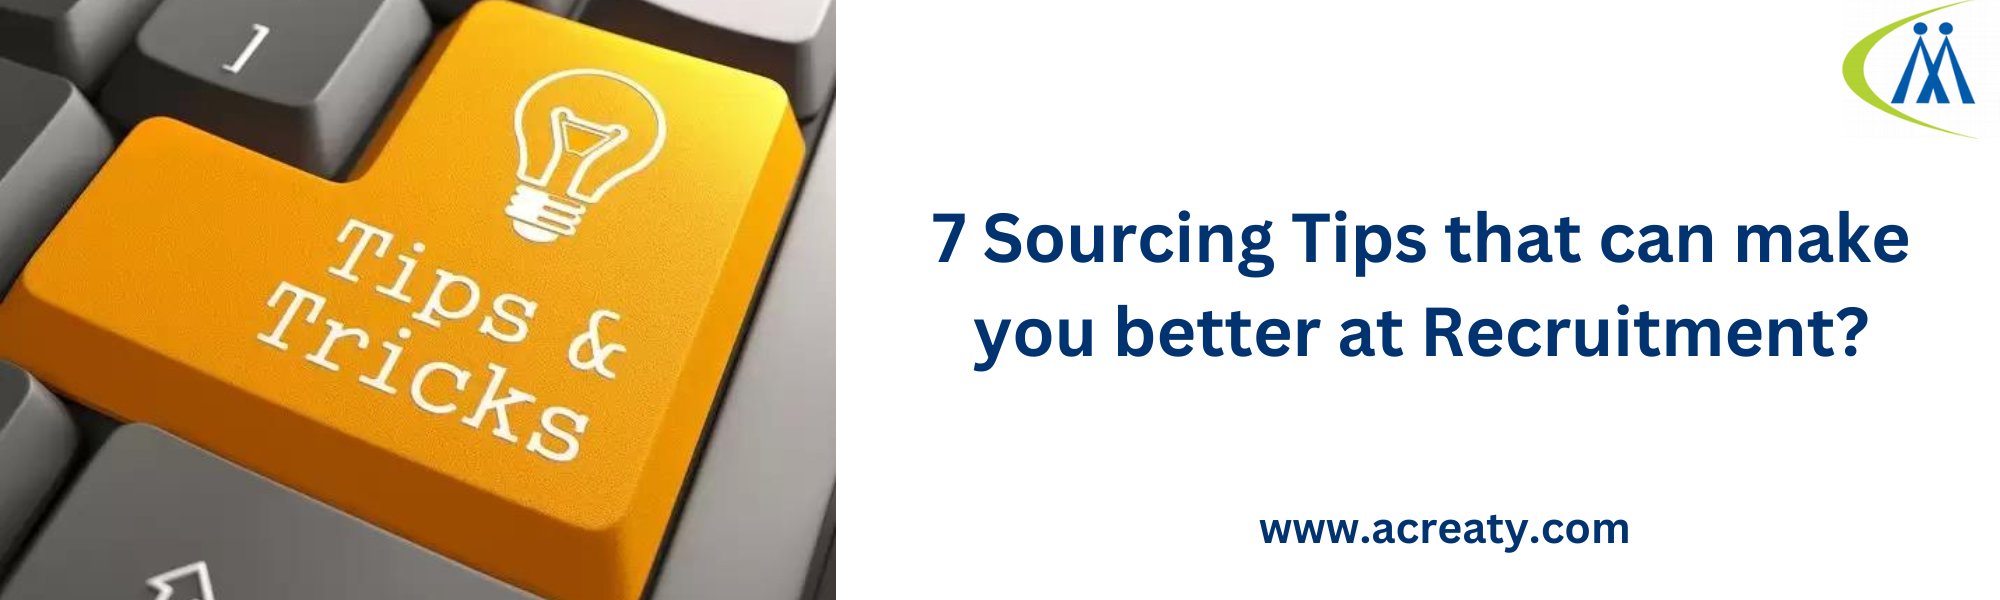 7 Sourcing Tips that can make you better at Recruitment?